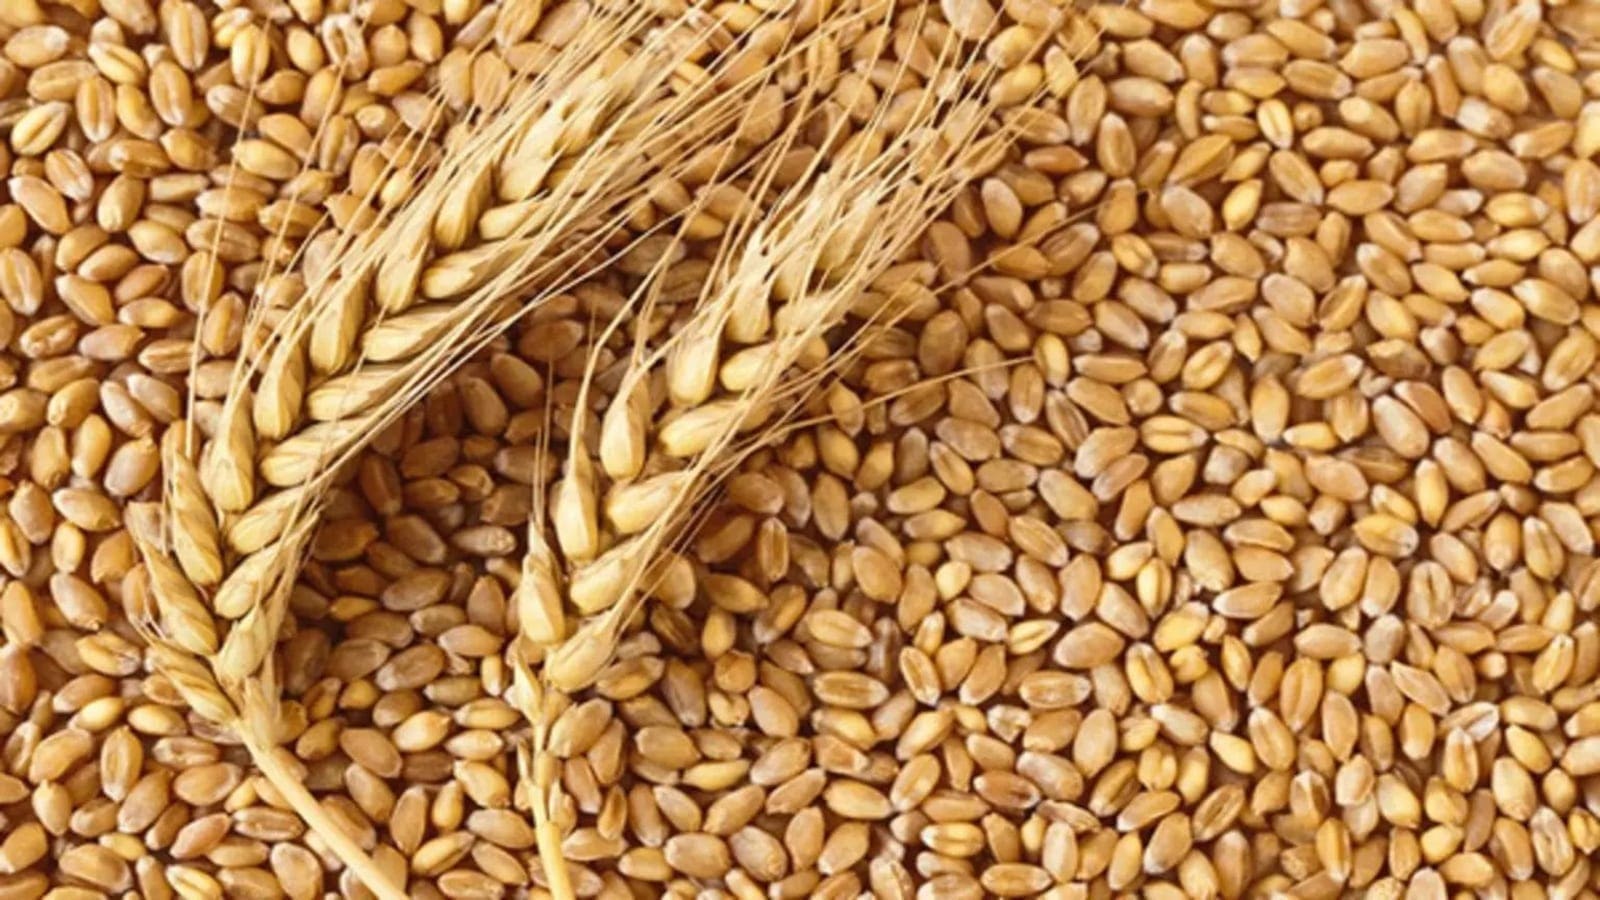 Egypt revises trade of key commodities to ensure food security, support local sector